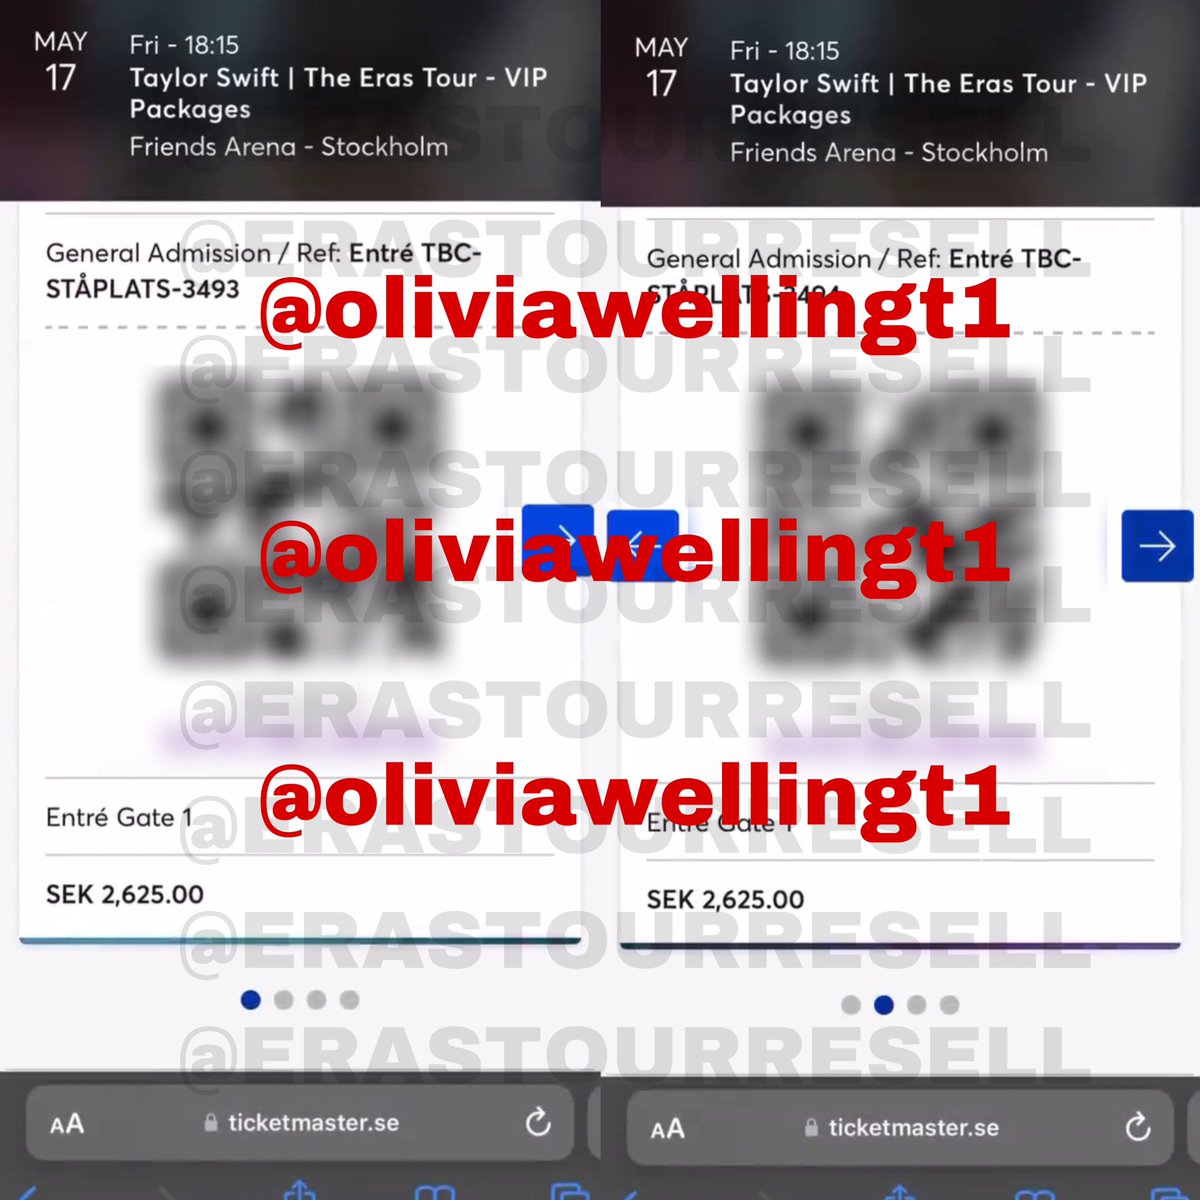 Selling TWO (2) VIP GA FLOOR tickets to the show in Stockholm at Friends Arena on 17 May 2024 💌 Selling for 5,250 SEK / $491 USD TOTAL 💌 DM @OliviaWellingt1 if interested (tickets and price have been verified) 💌 ONLY USE PAYPAL G&S‼️ 🏷 Eras Tour, Taylor Swift